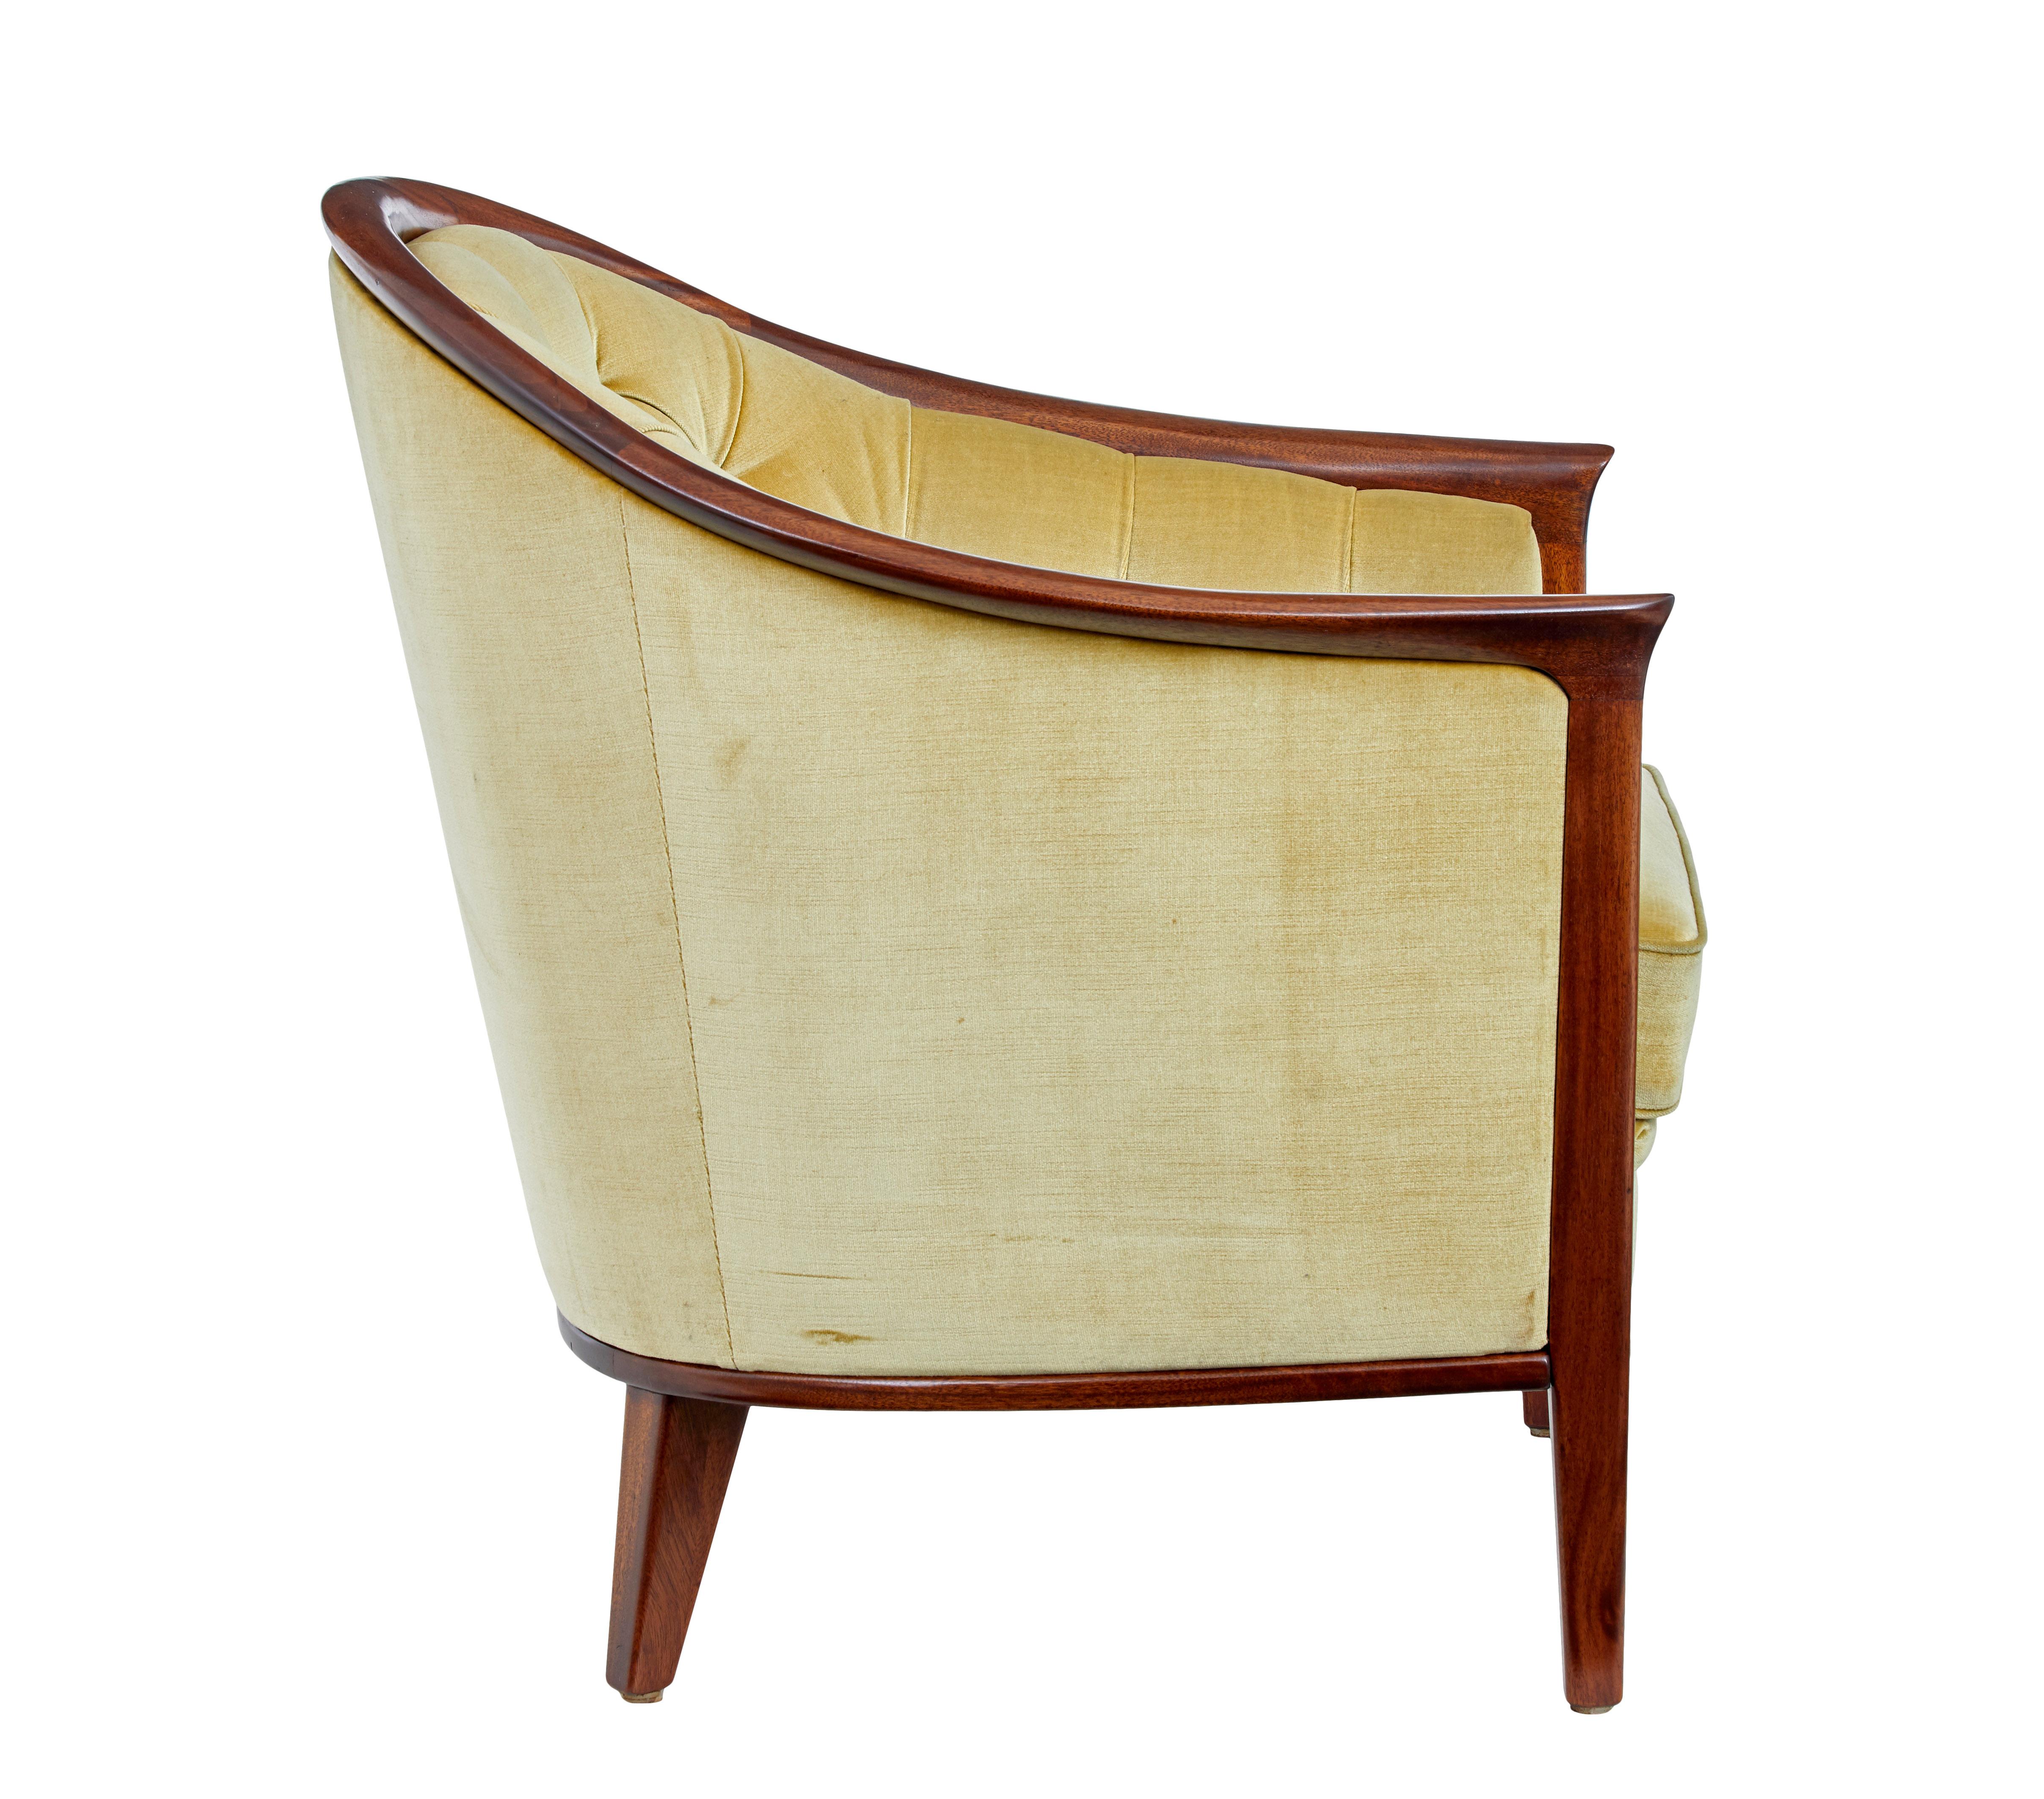 Hand-Crafted Mid 20th century teak lounge chair by Andersson